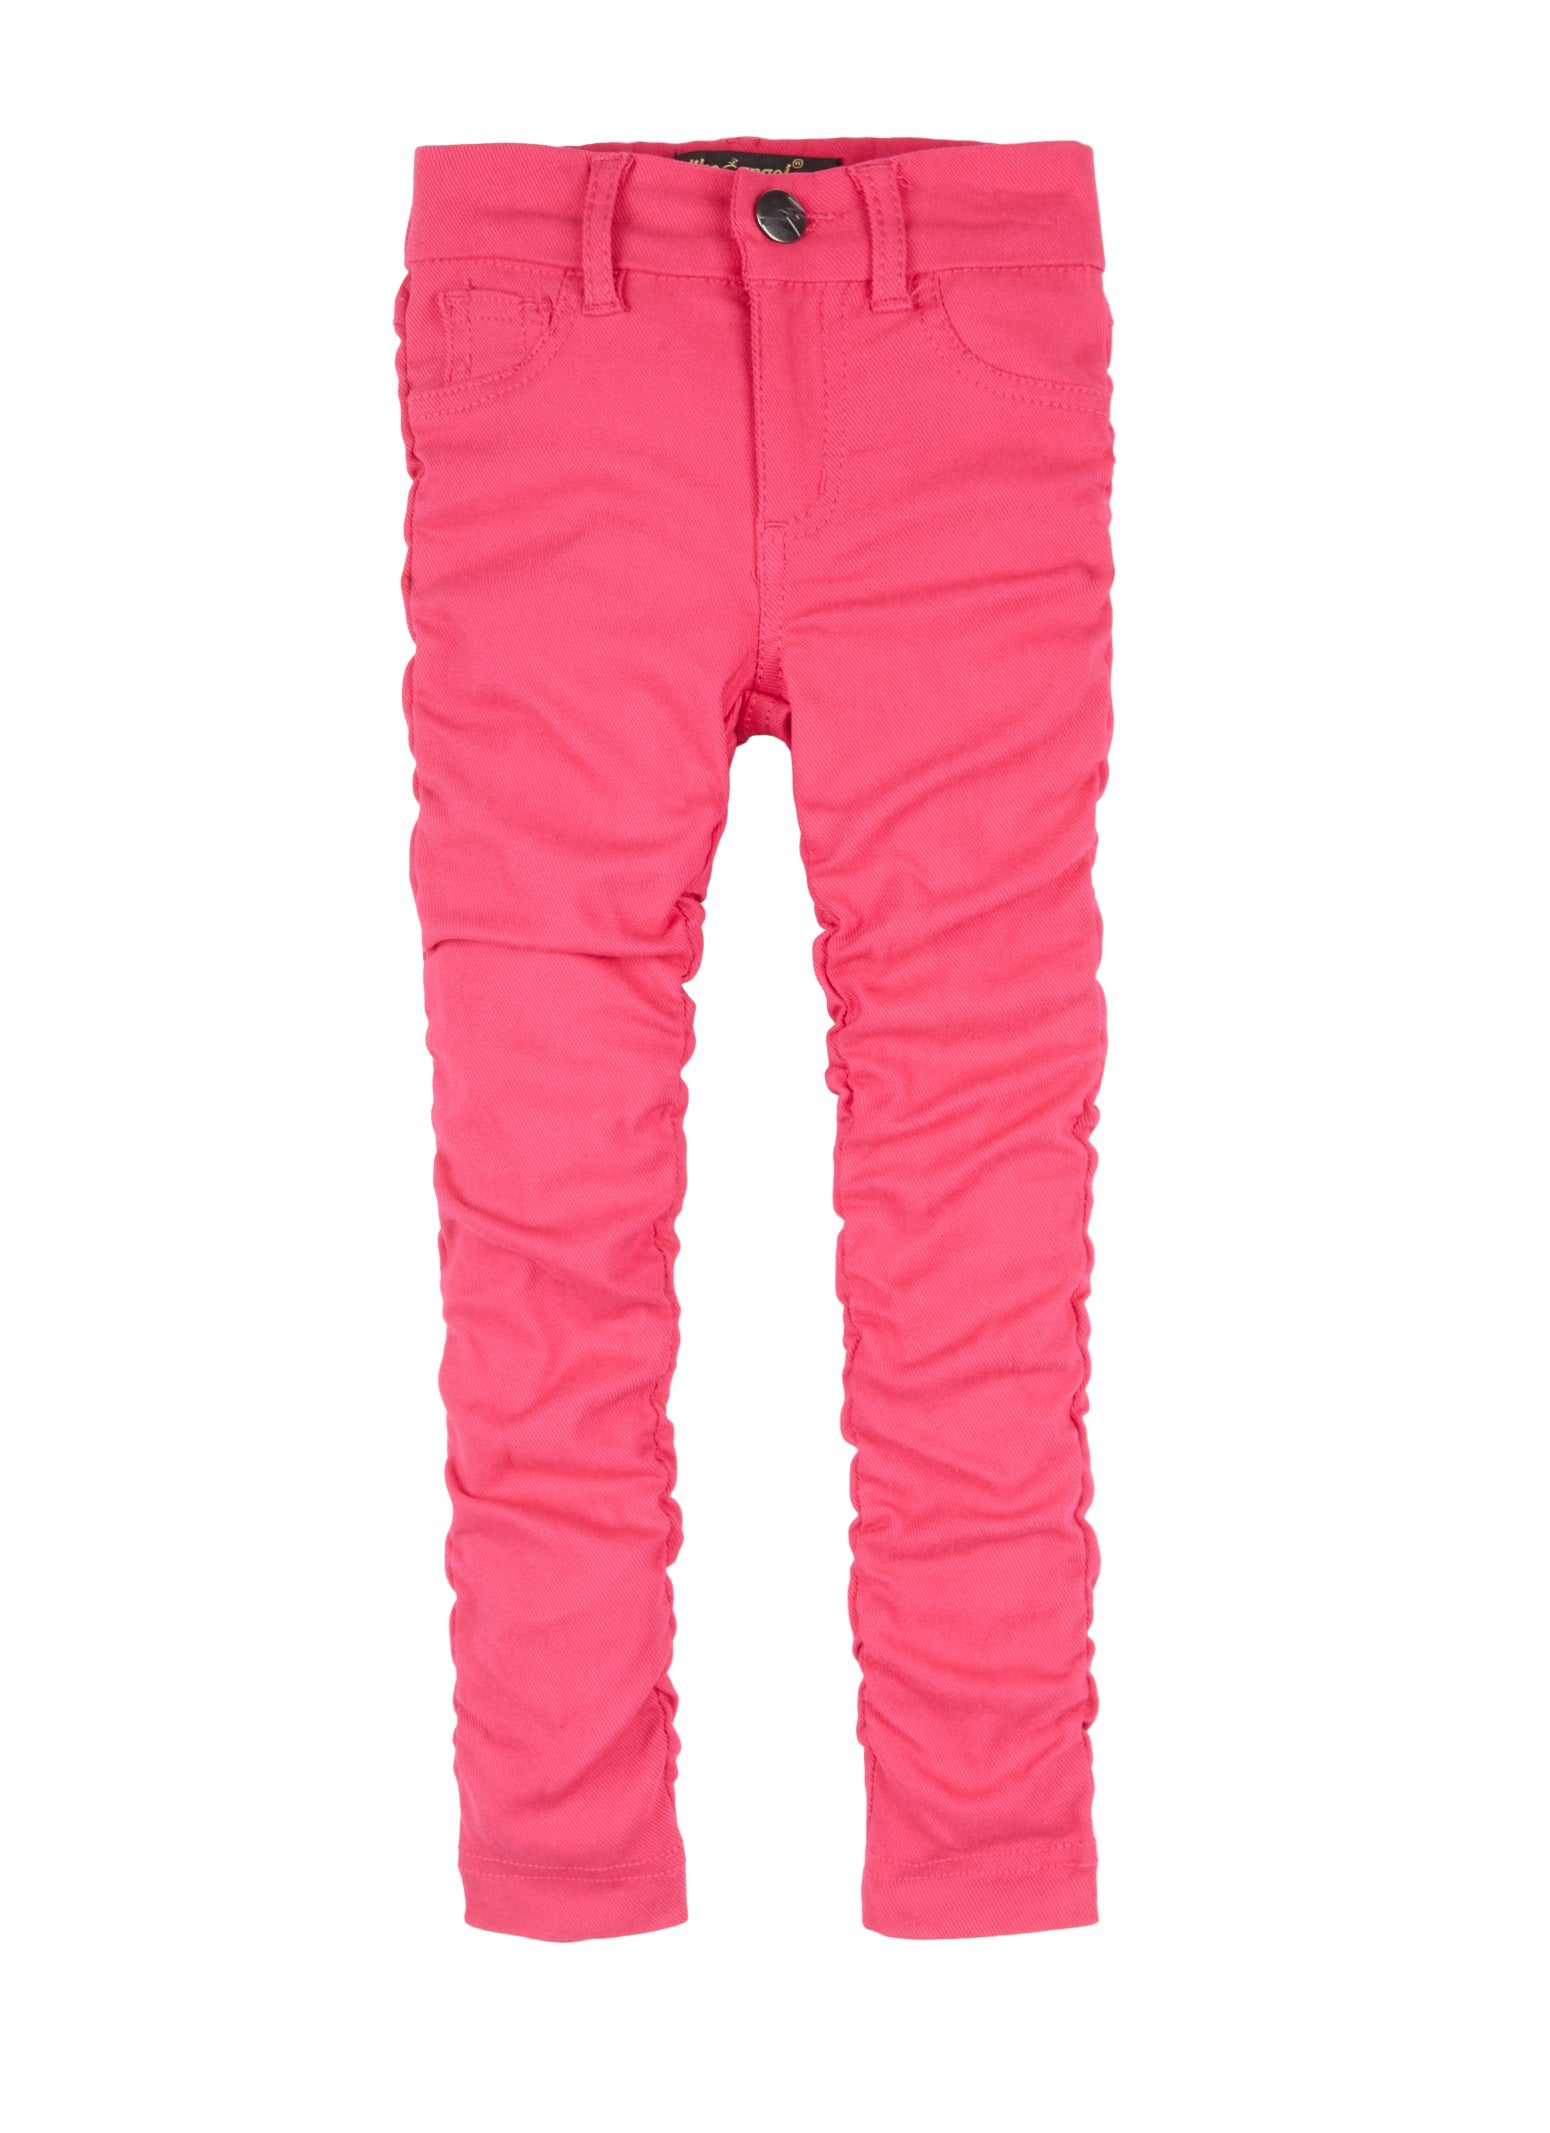 Rainbow Shops Toddler Girls Ruched Skinny Pants, Pink, Size 4T